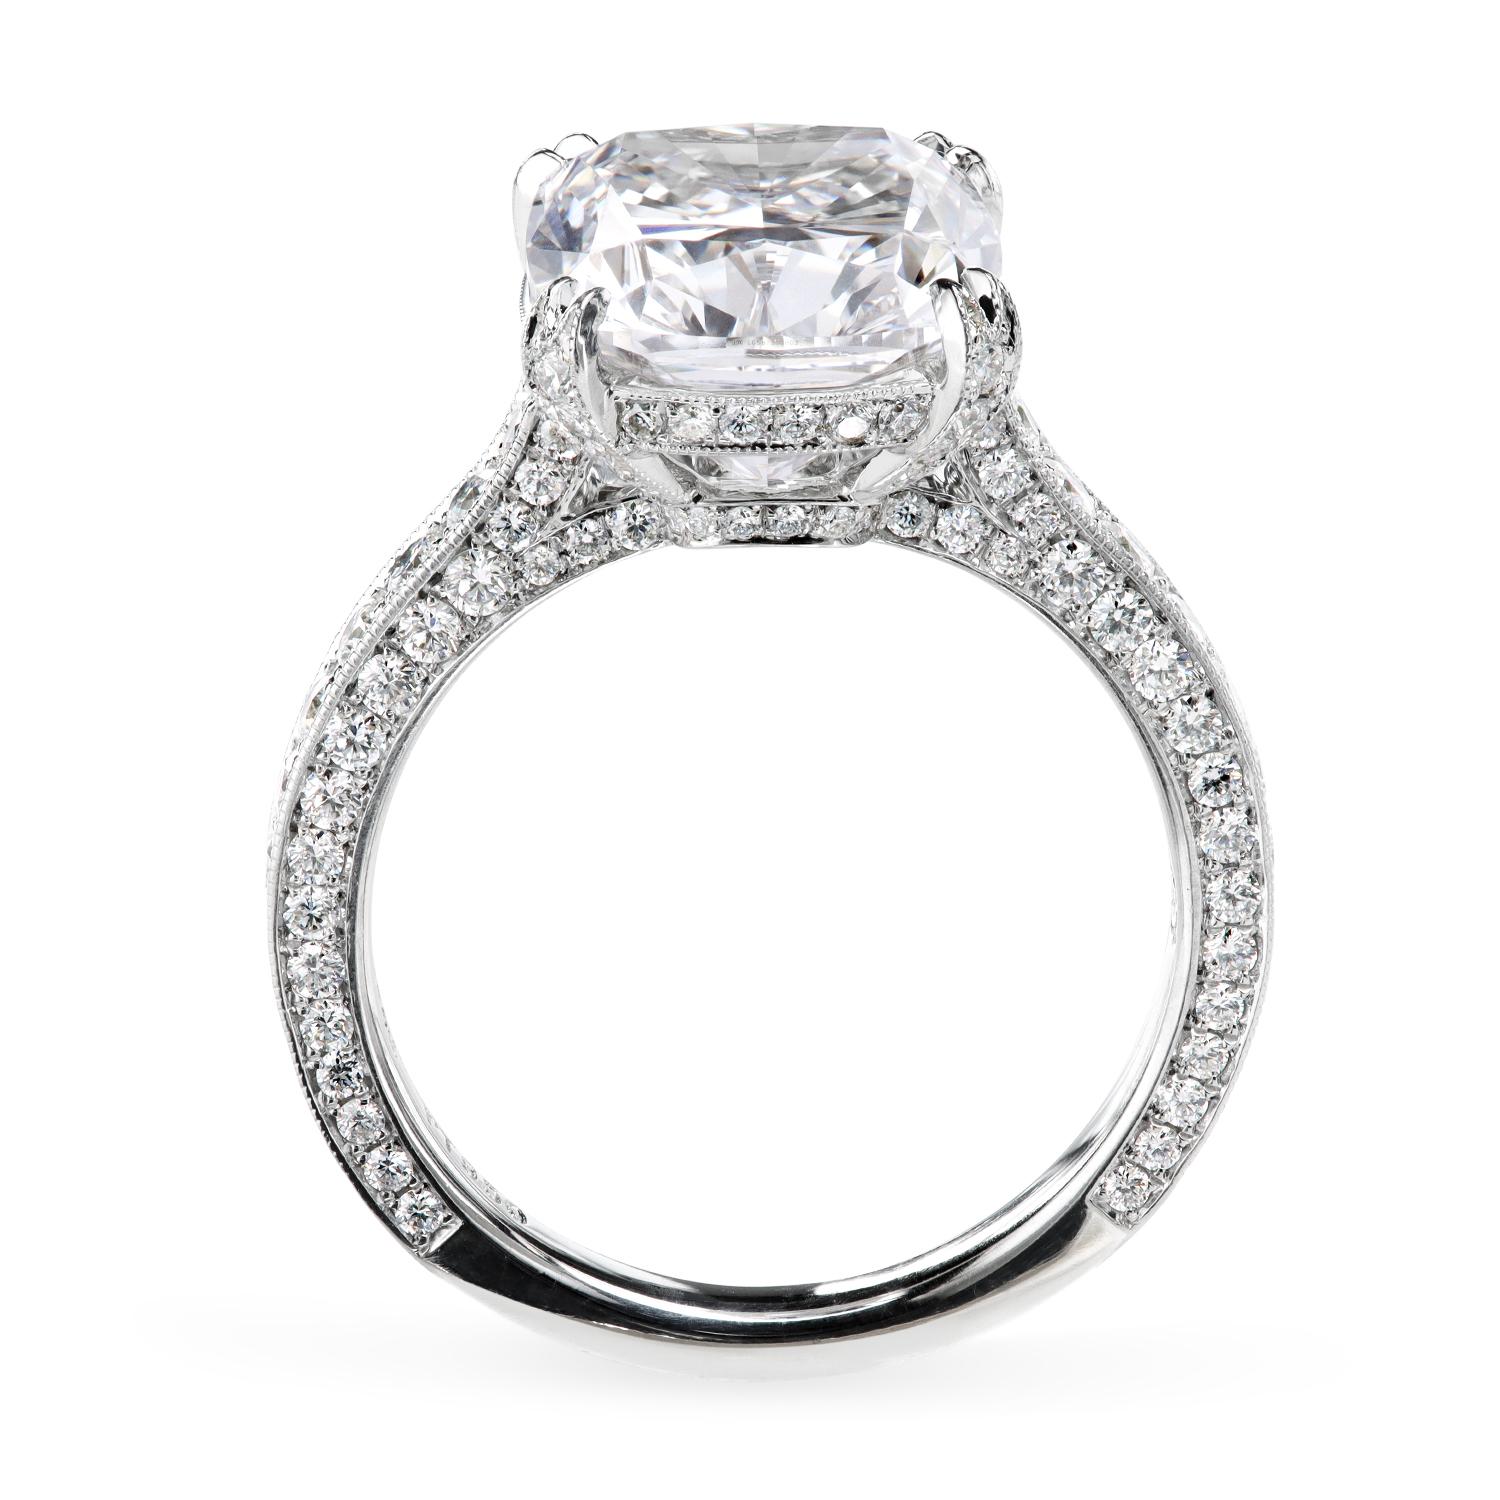 For Sale:  Leon Mege platinum engagement ring with certified cushion diamond 4